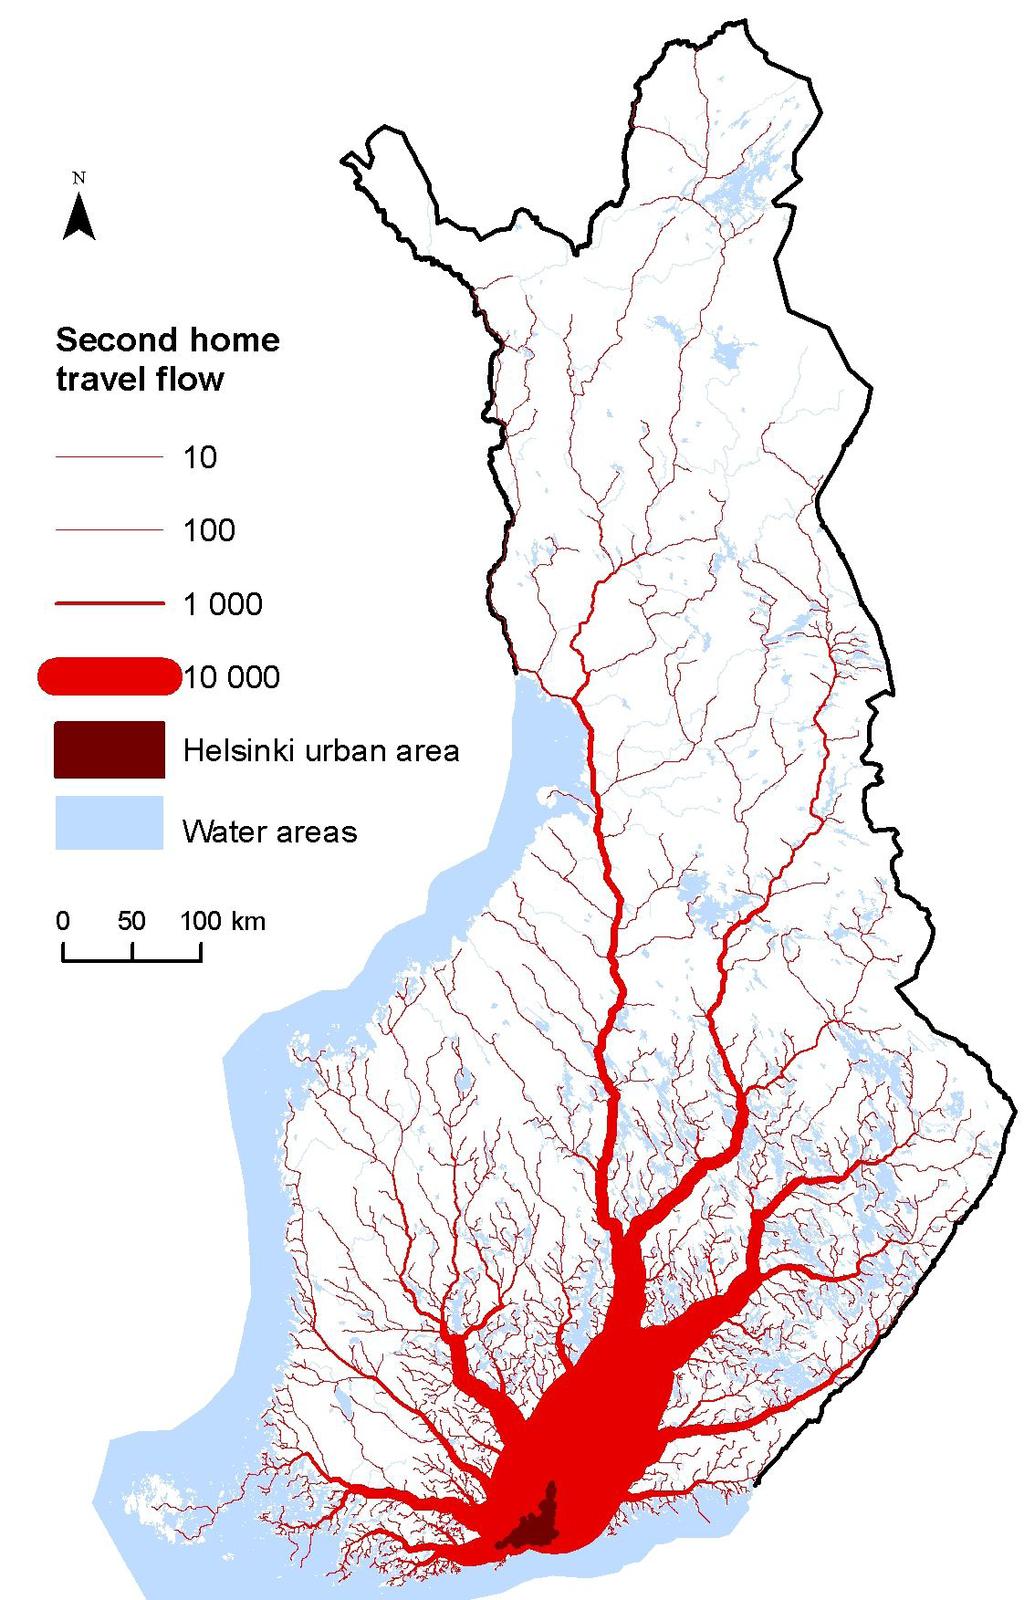 Second home mobility in Finland: Patterns, practices and... are often used as second homes. The large Lake Oulujärvi clearly attracts second home owners in a region which otherwise has few lakes.